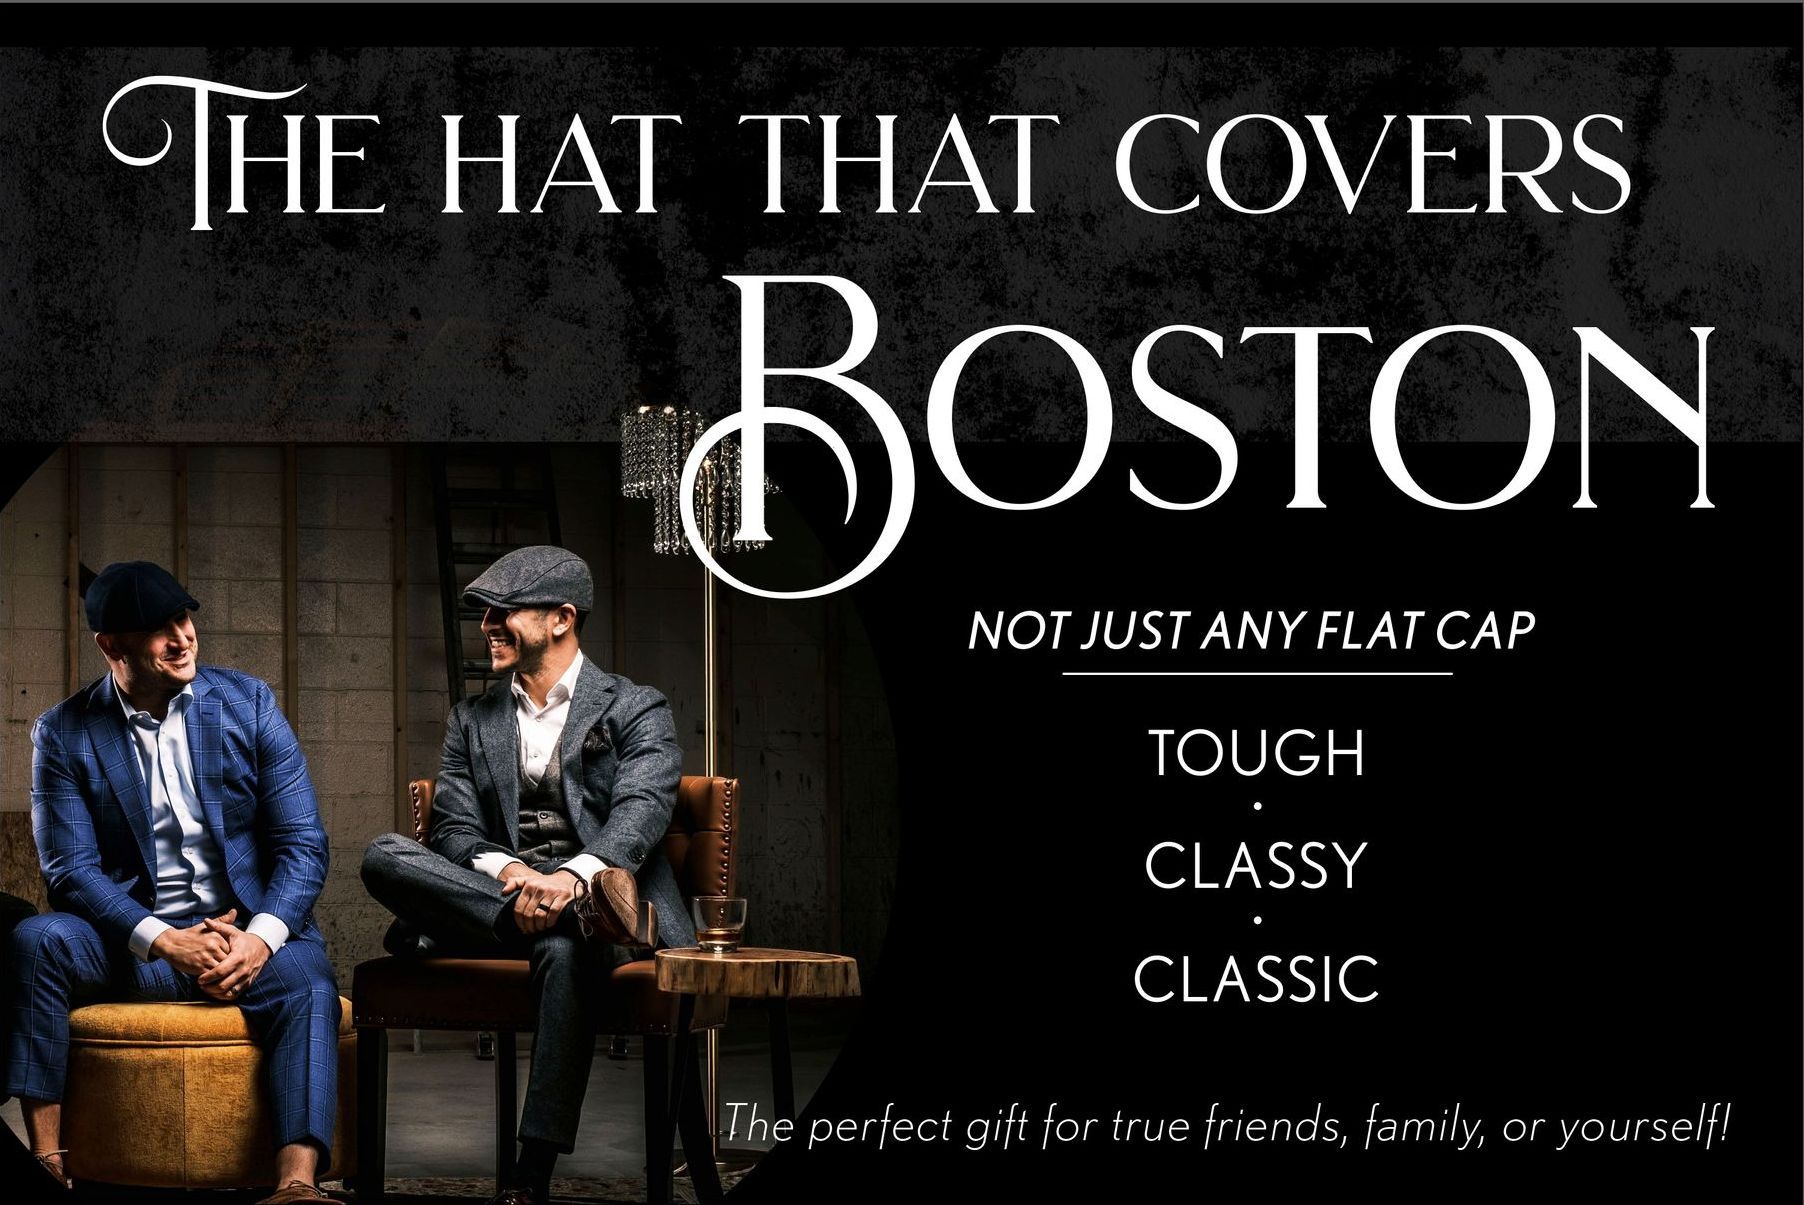 A poster for the hat that covers boston